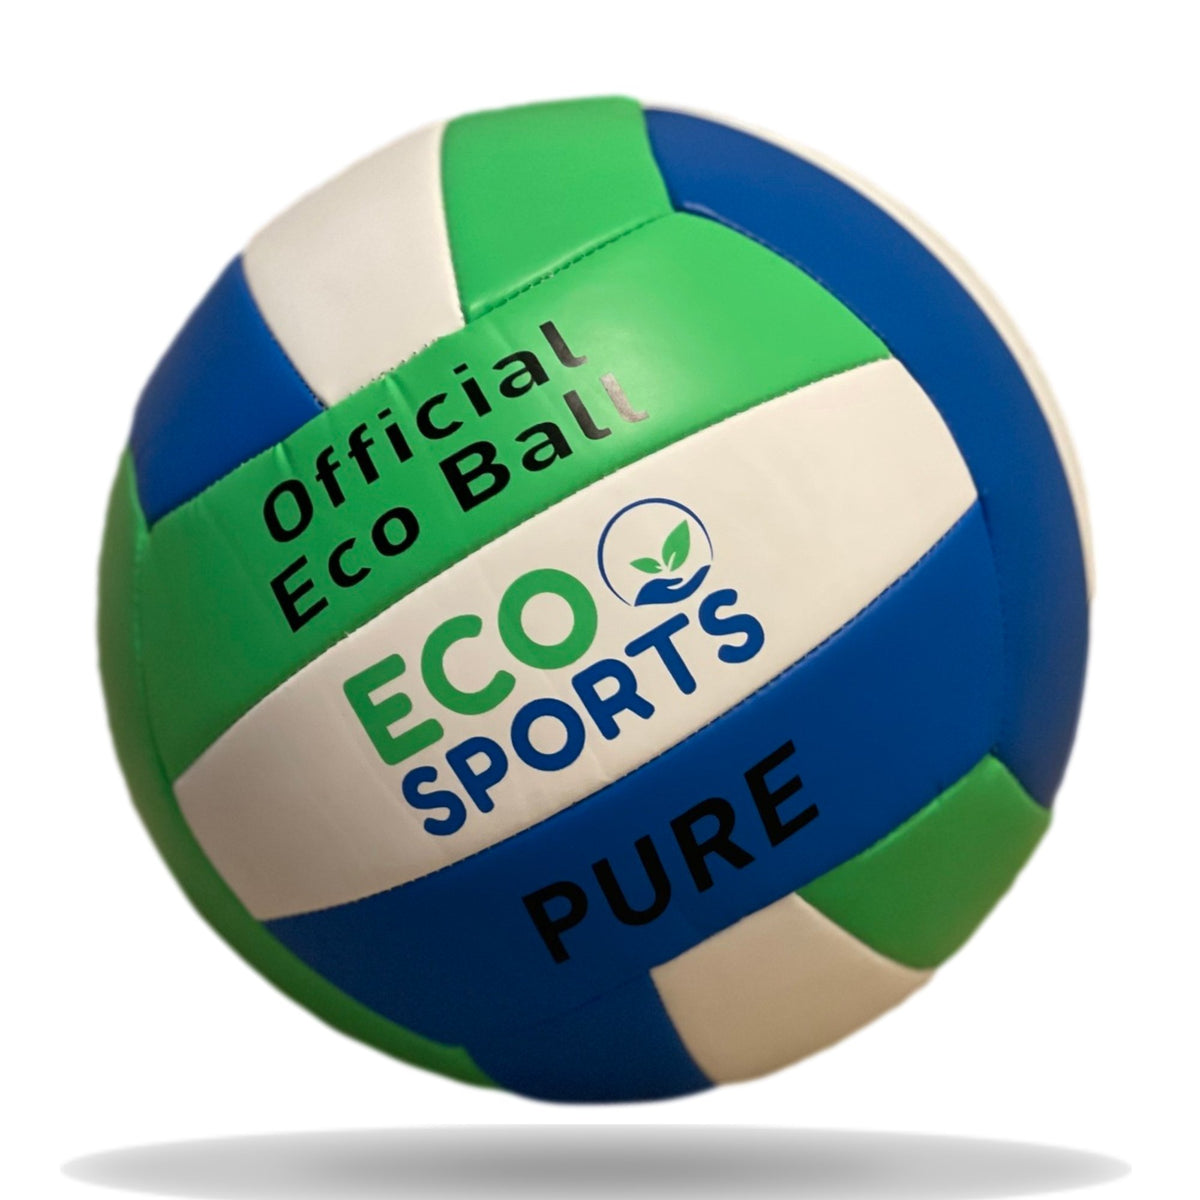 Compare prices for Volley Accessoires & Cadeaux across all European   stores